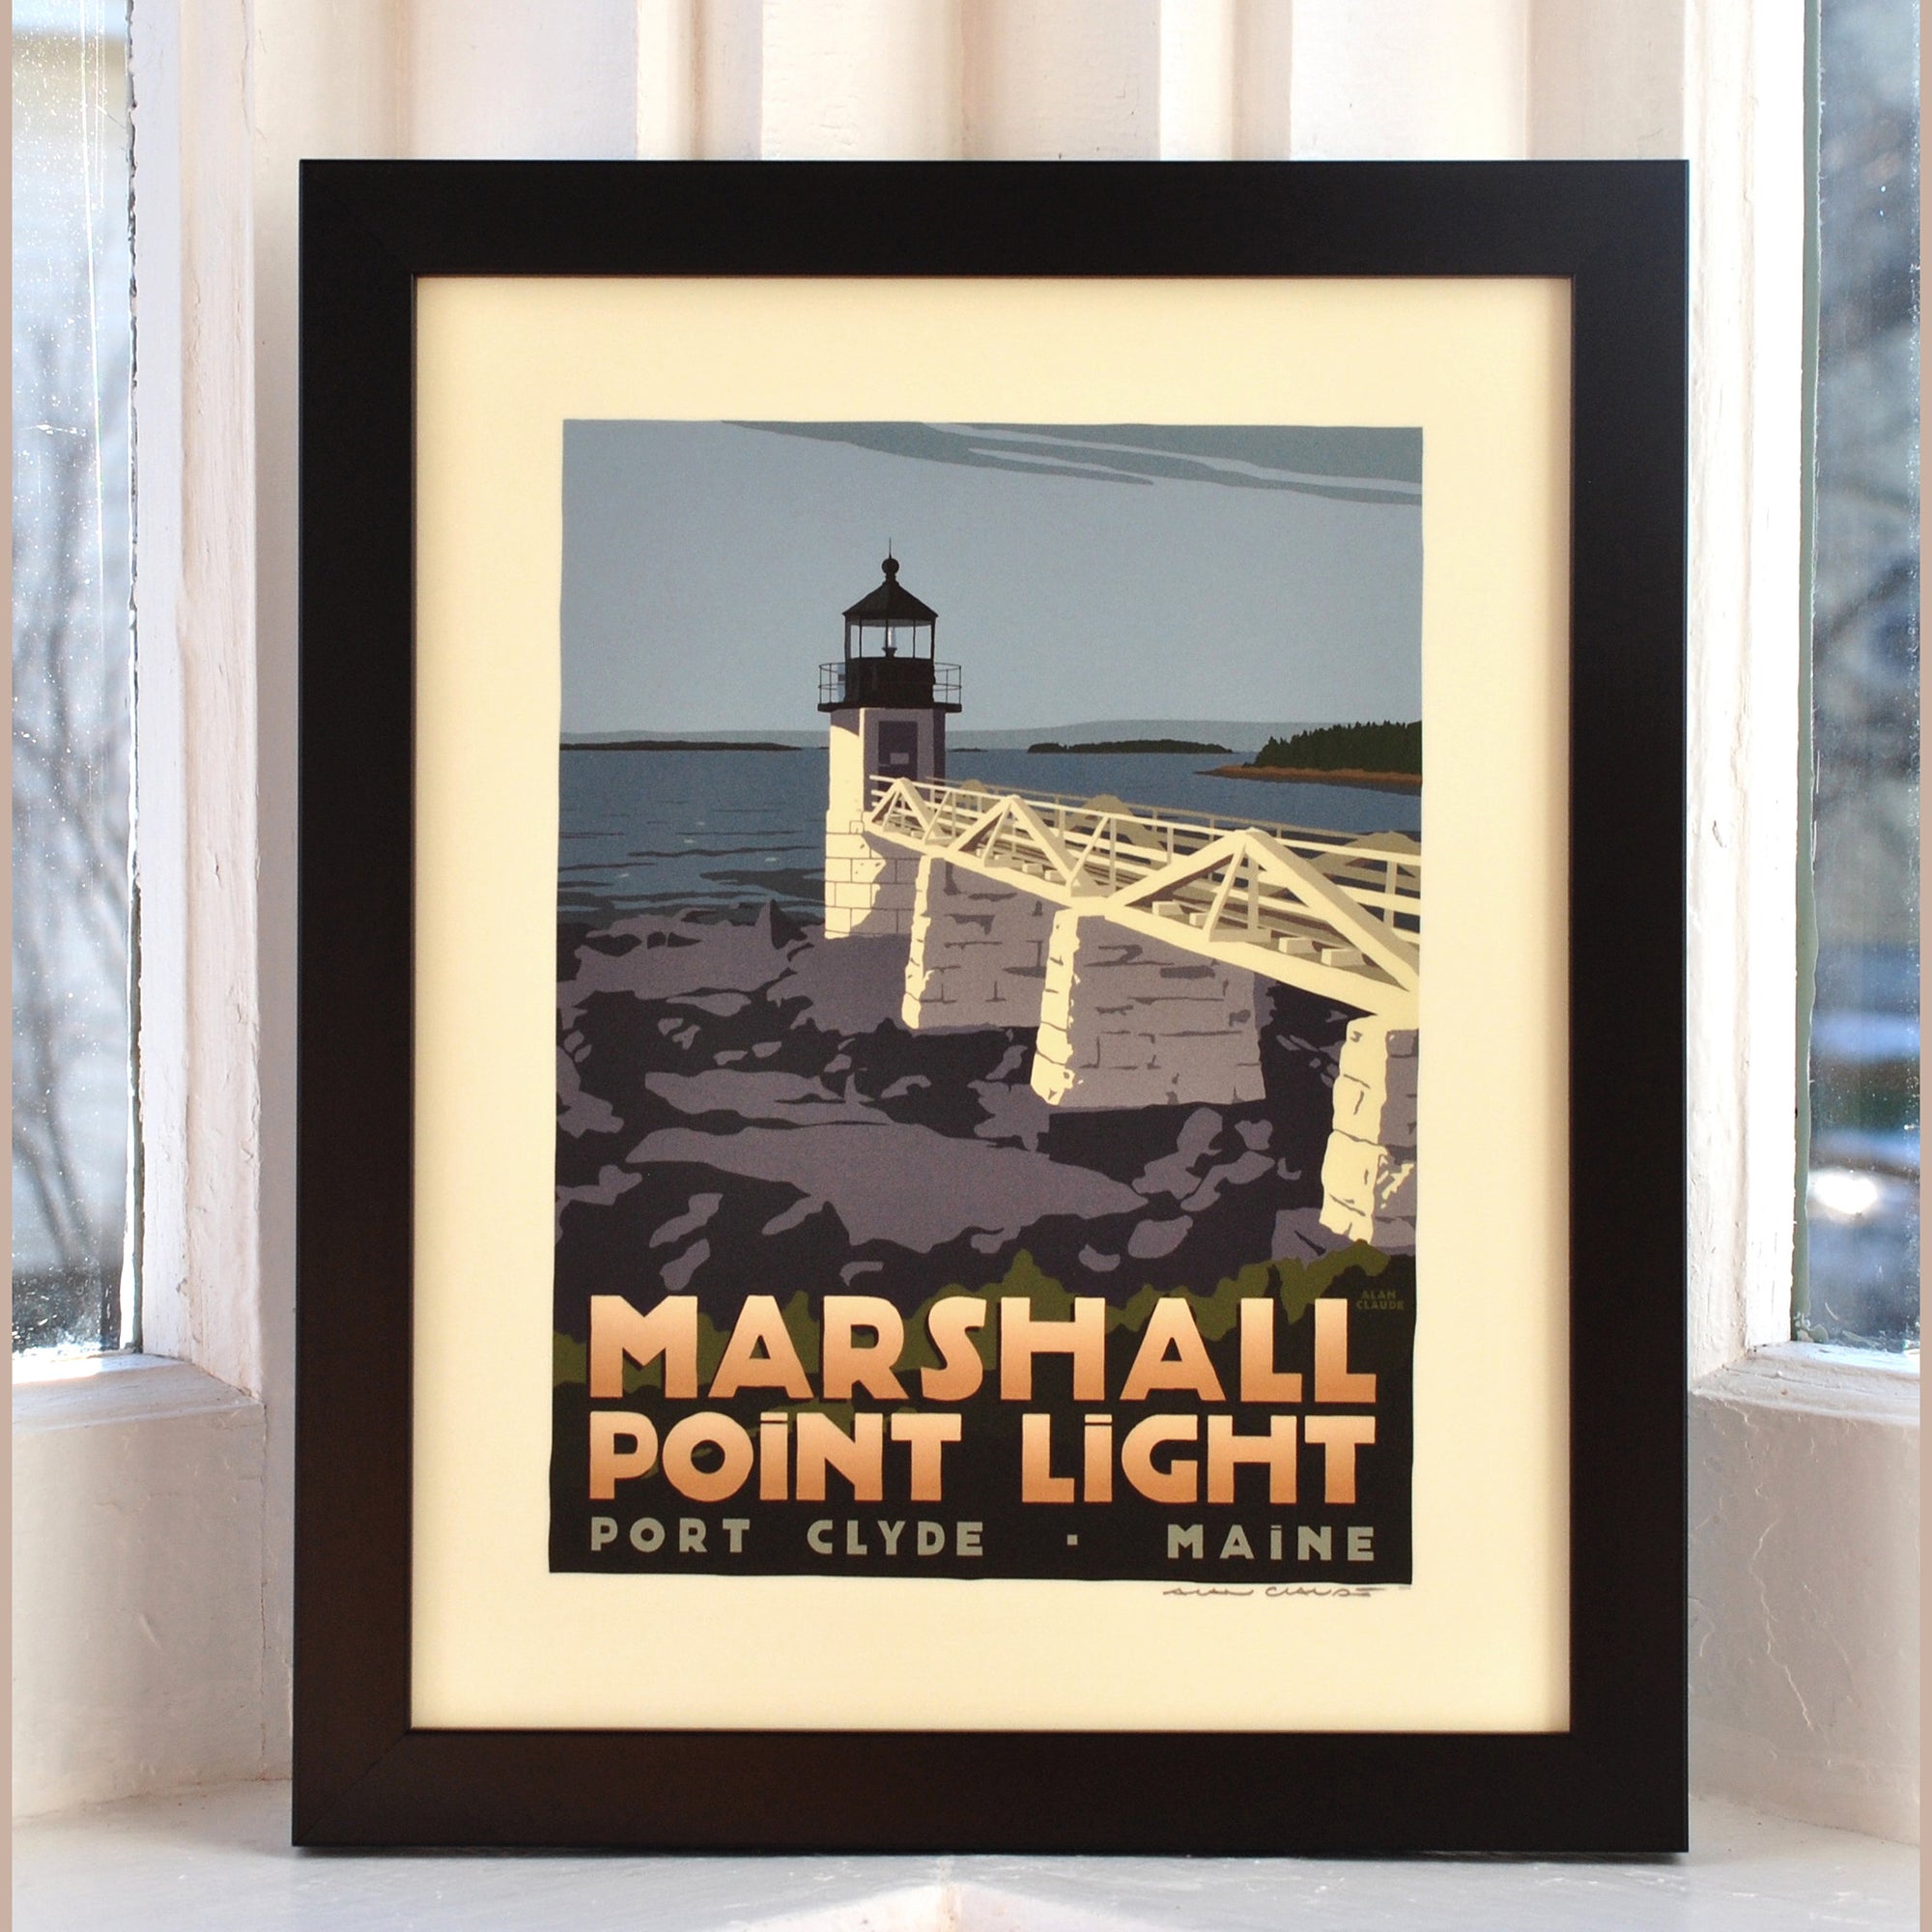 Marshall Point Light Art Print 8" x 10" Framed Travel Poster By Alan Claude - Maine